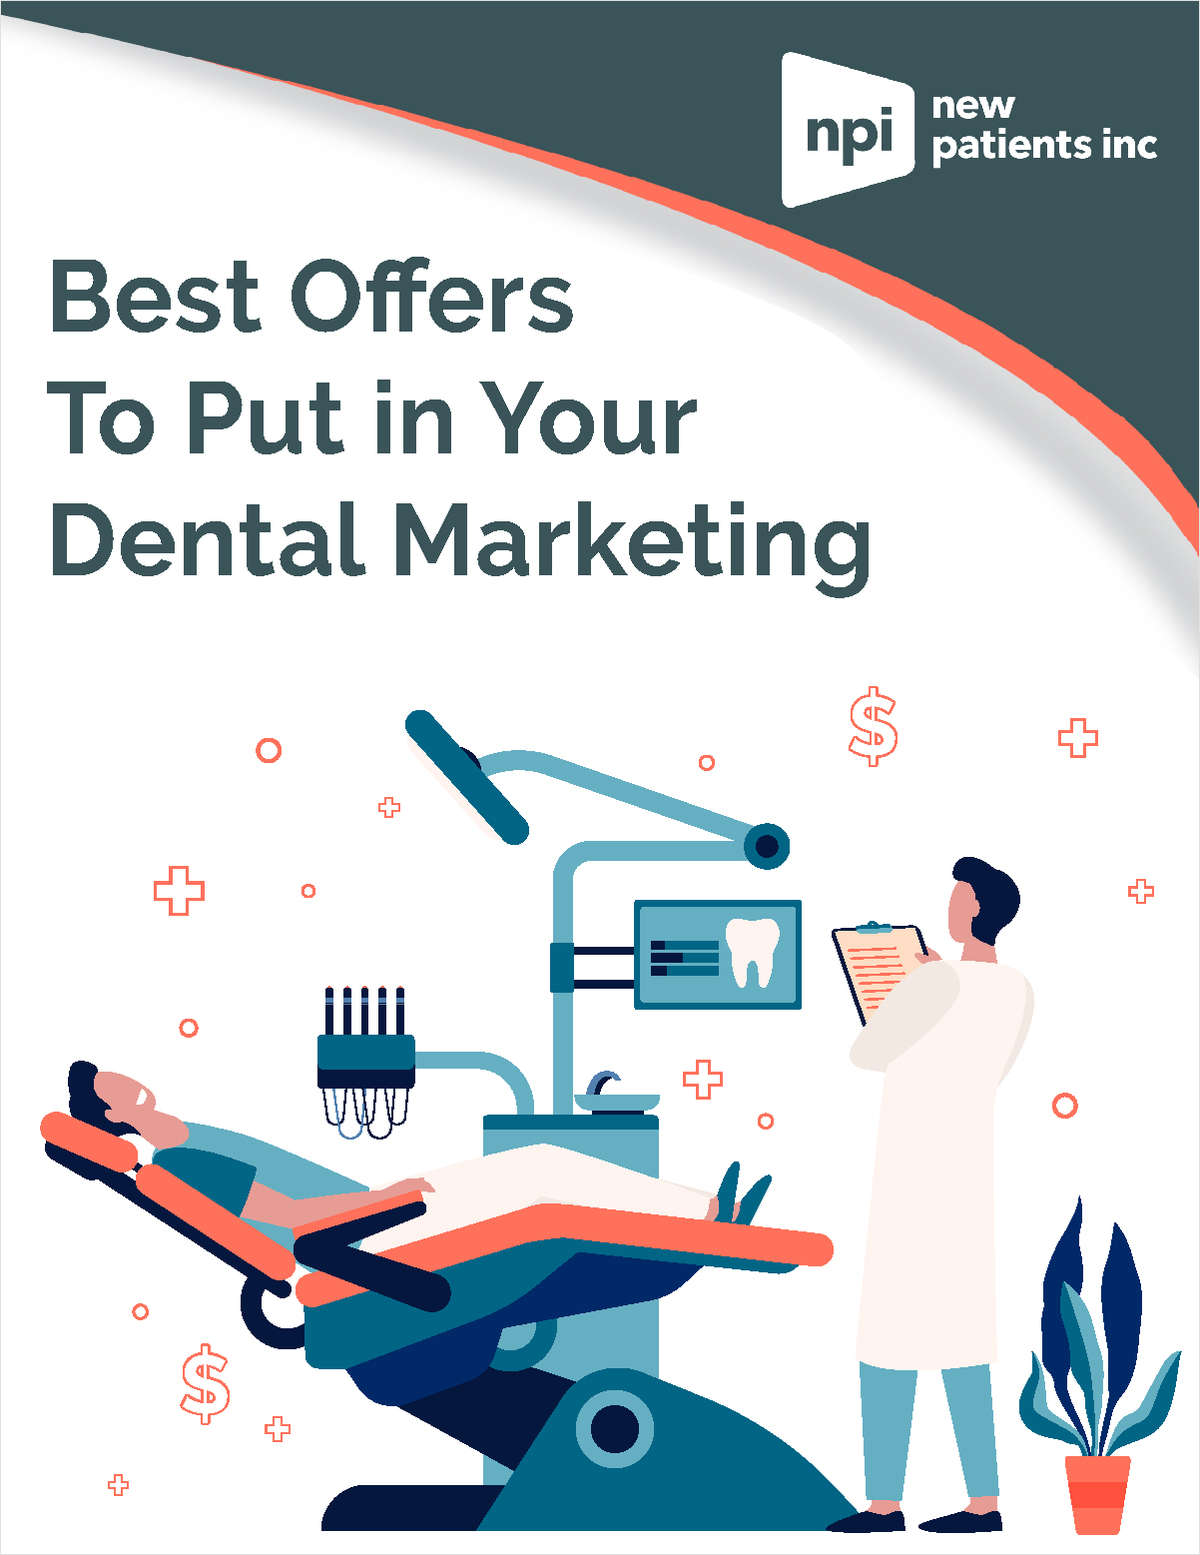 Best Offers to Put in Your Dental Marketing